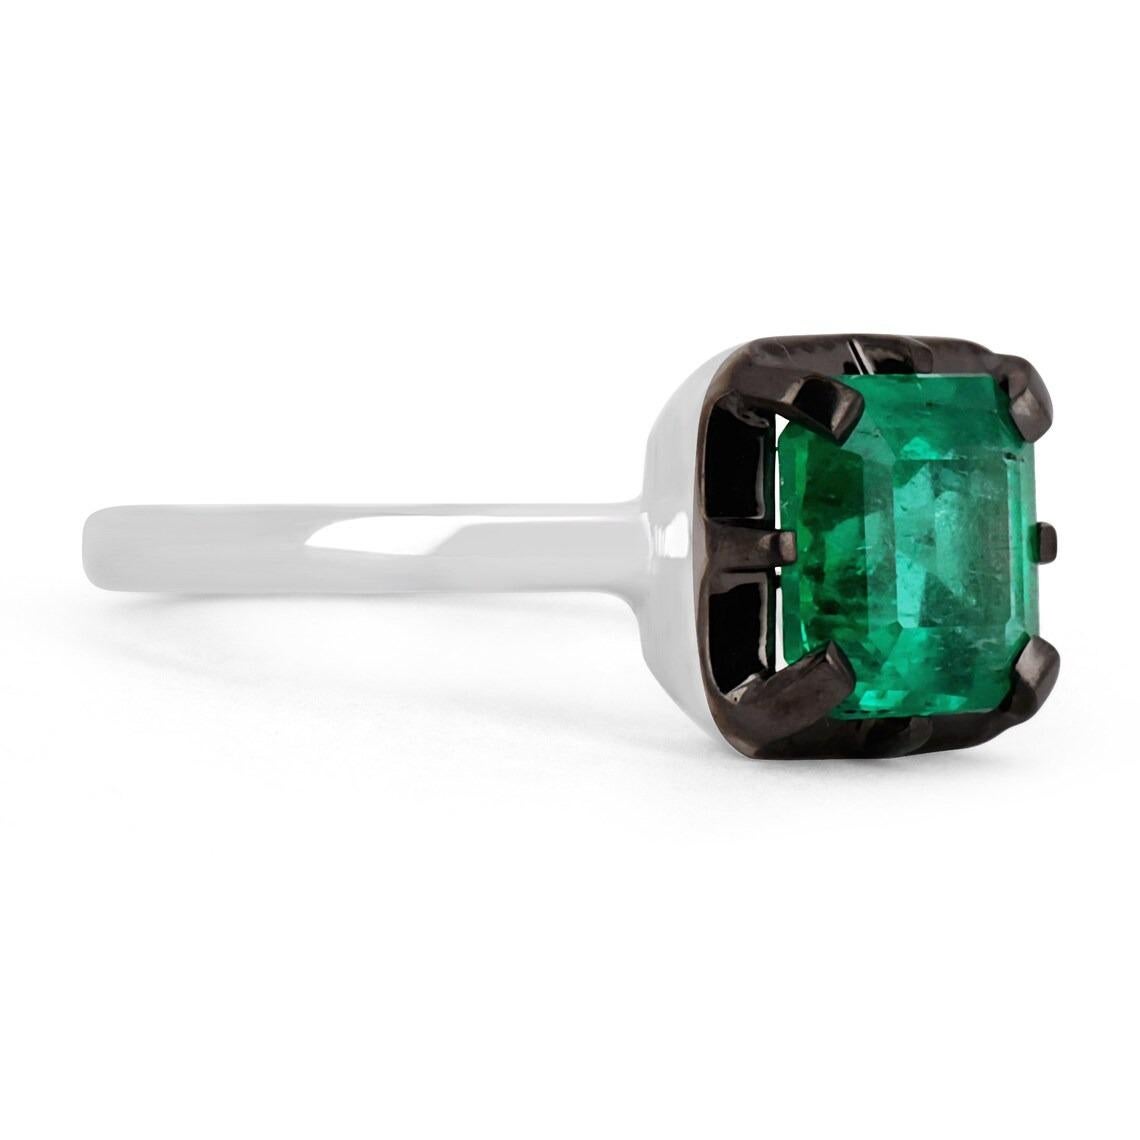 Displayed is a one-of-a-kind, natural emerald solitaire Asscher-cut engagement ring/right-hand ring in 18K white gold, with black rhodium over the face. This gorgeous solitaire ring carries a full 1.76-carat Colombian emerald in a eight-prong